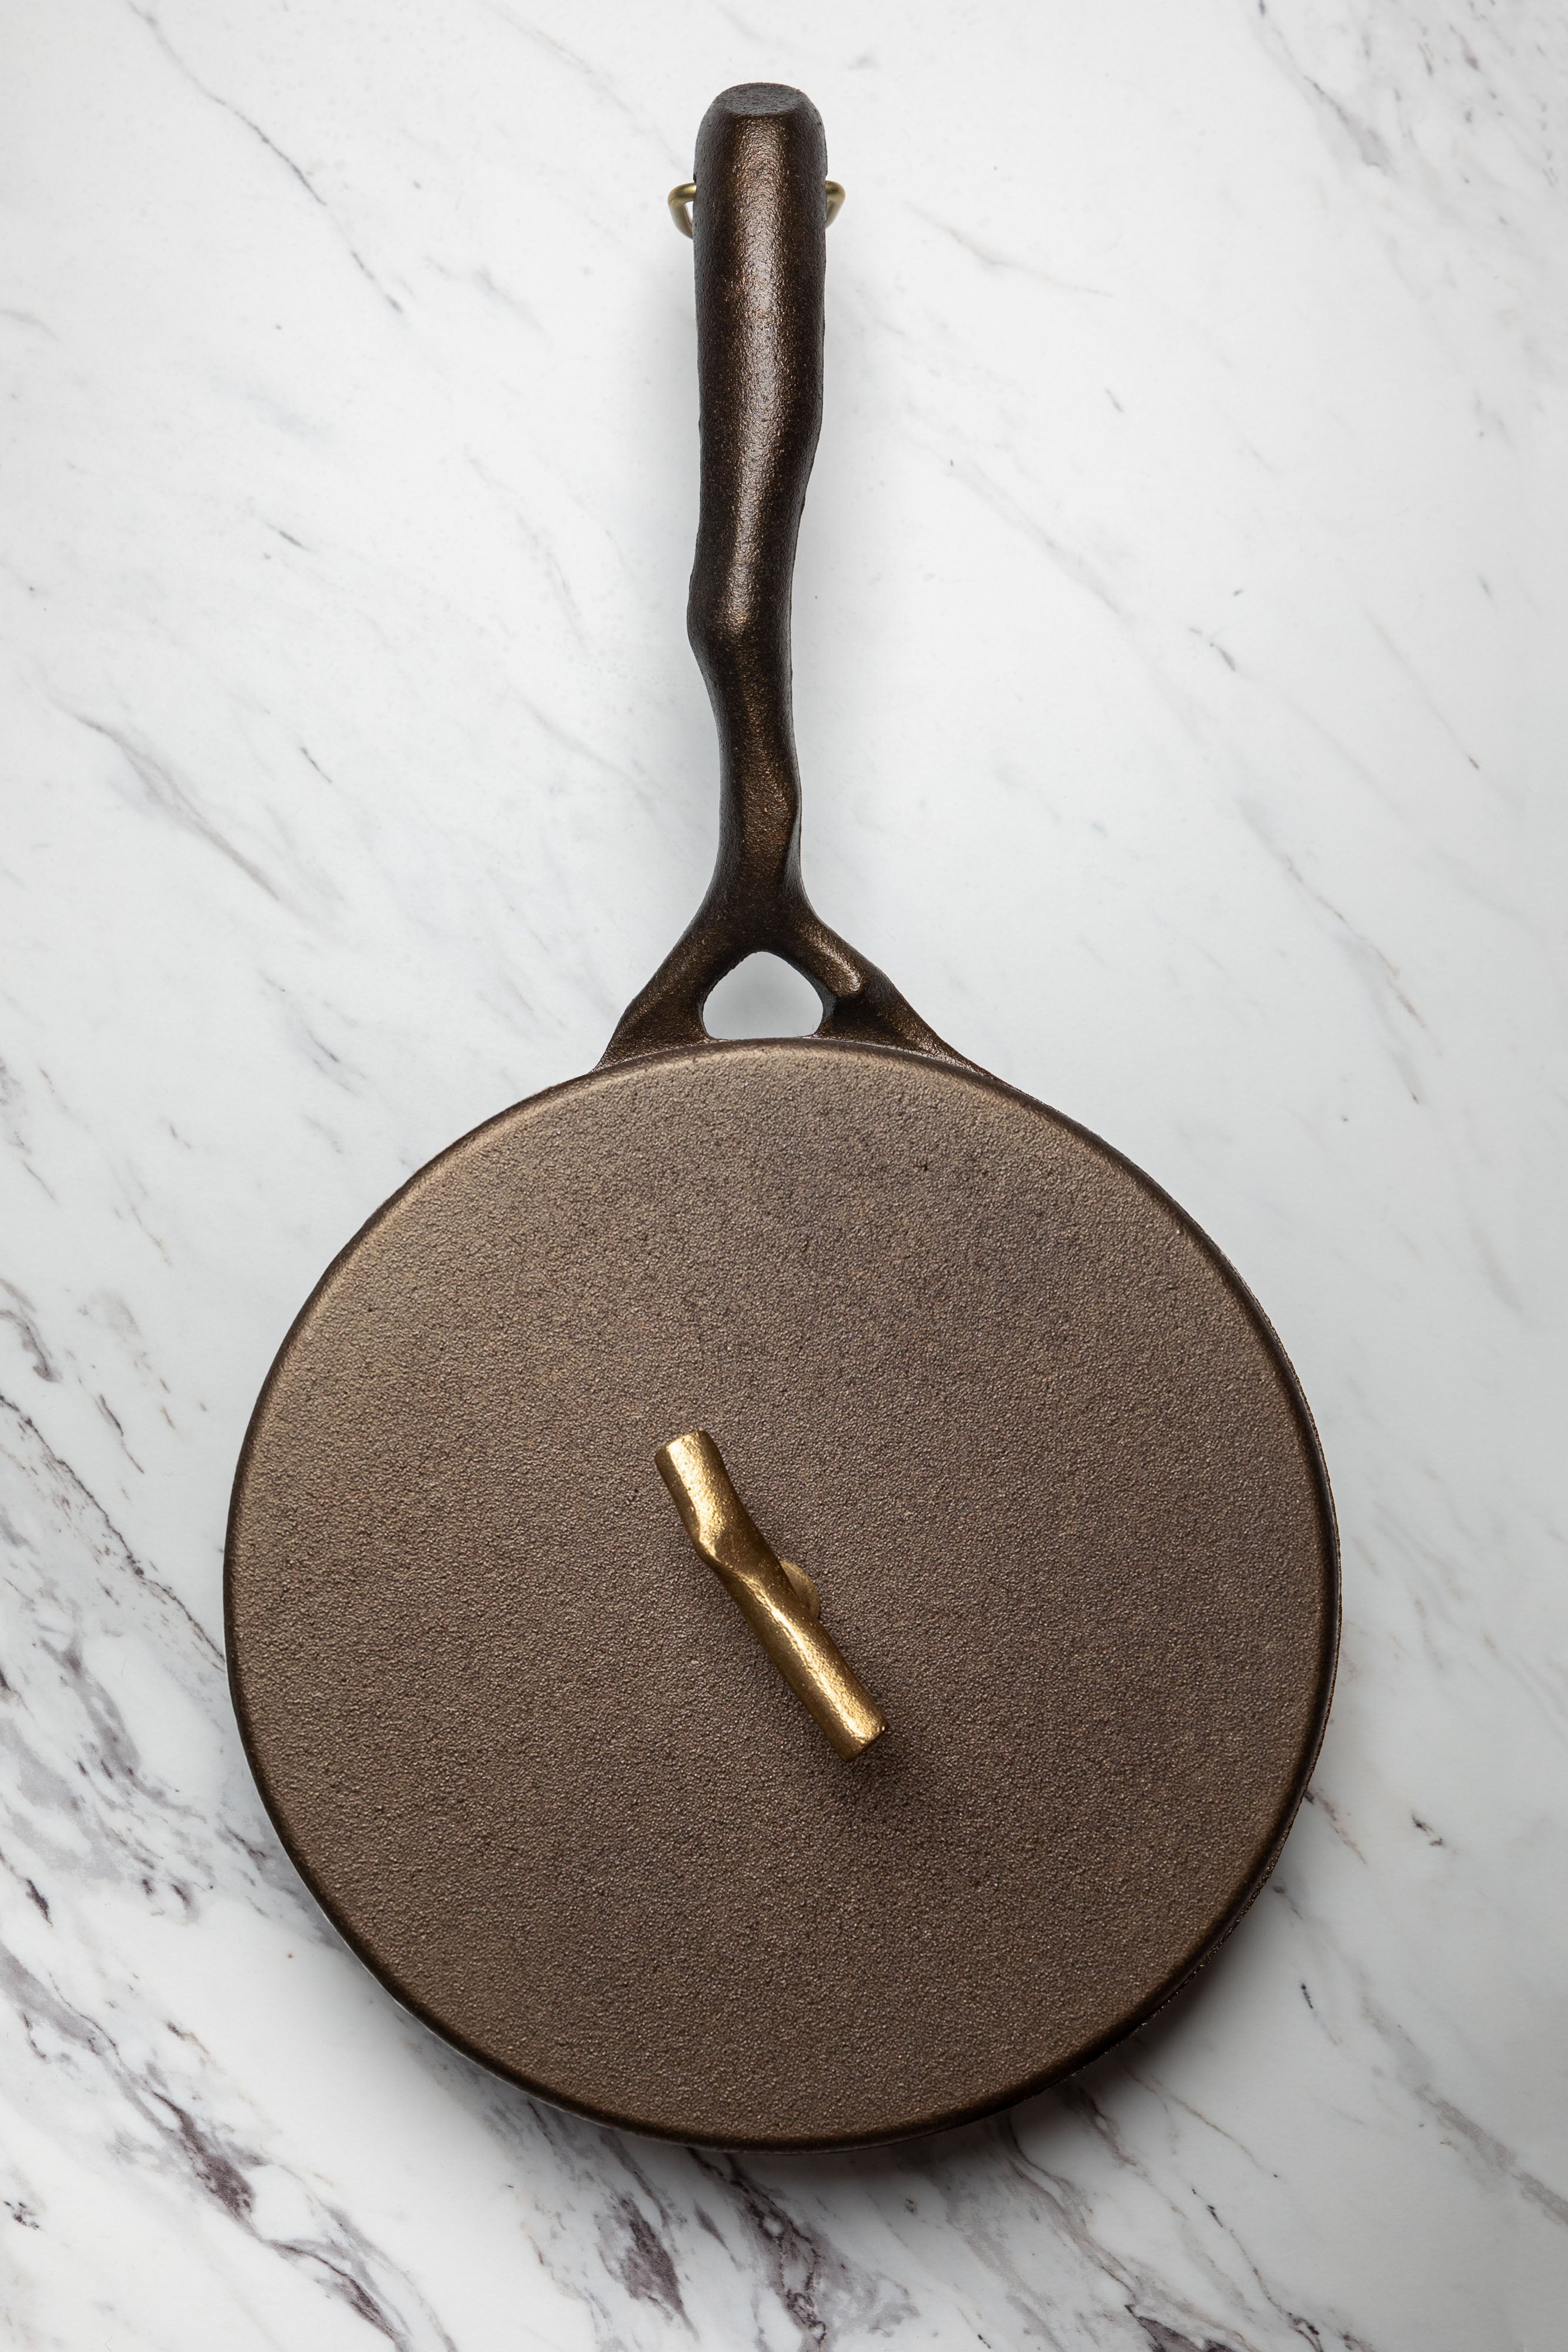 Handle for Cast Iron Skillet Pan